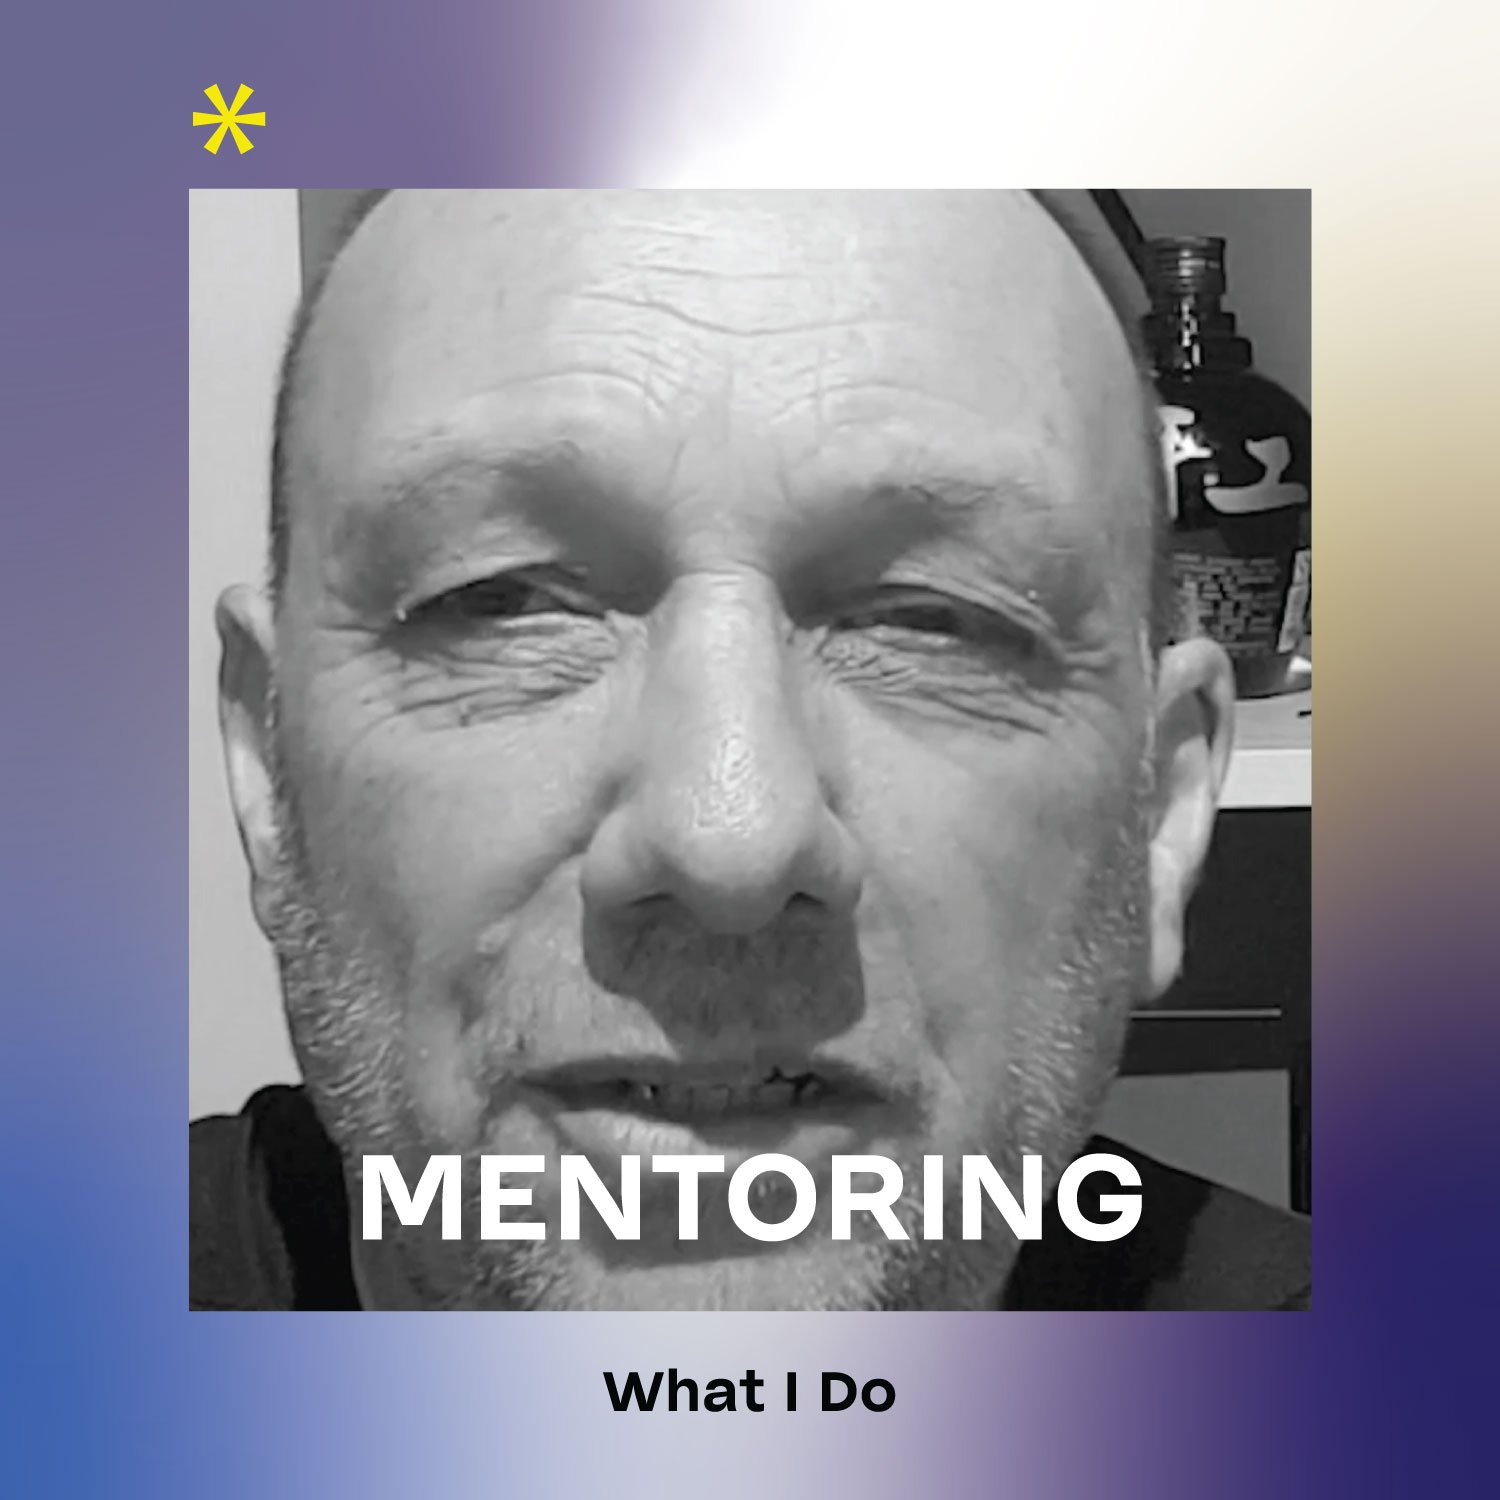 Renowned lighting designer Martin Klaasen presenting his personalized mentoring services for professional growth, business advancement, and personal development on his Light Talk website.